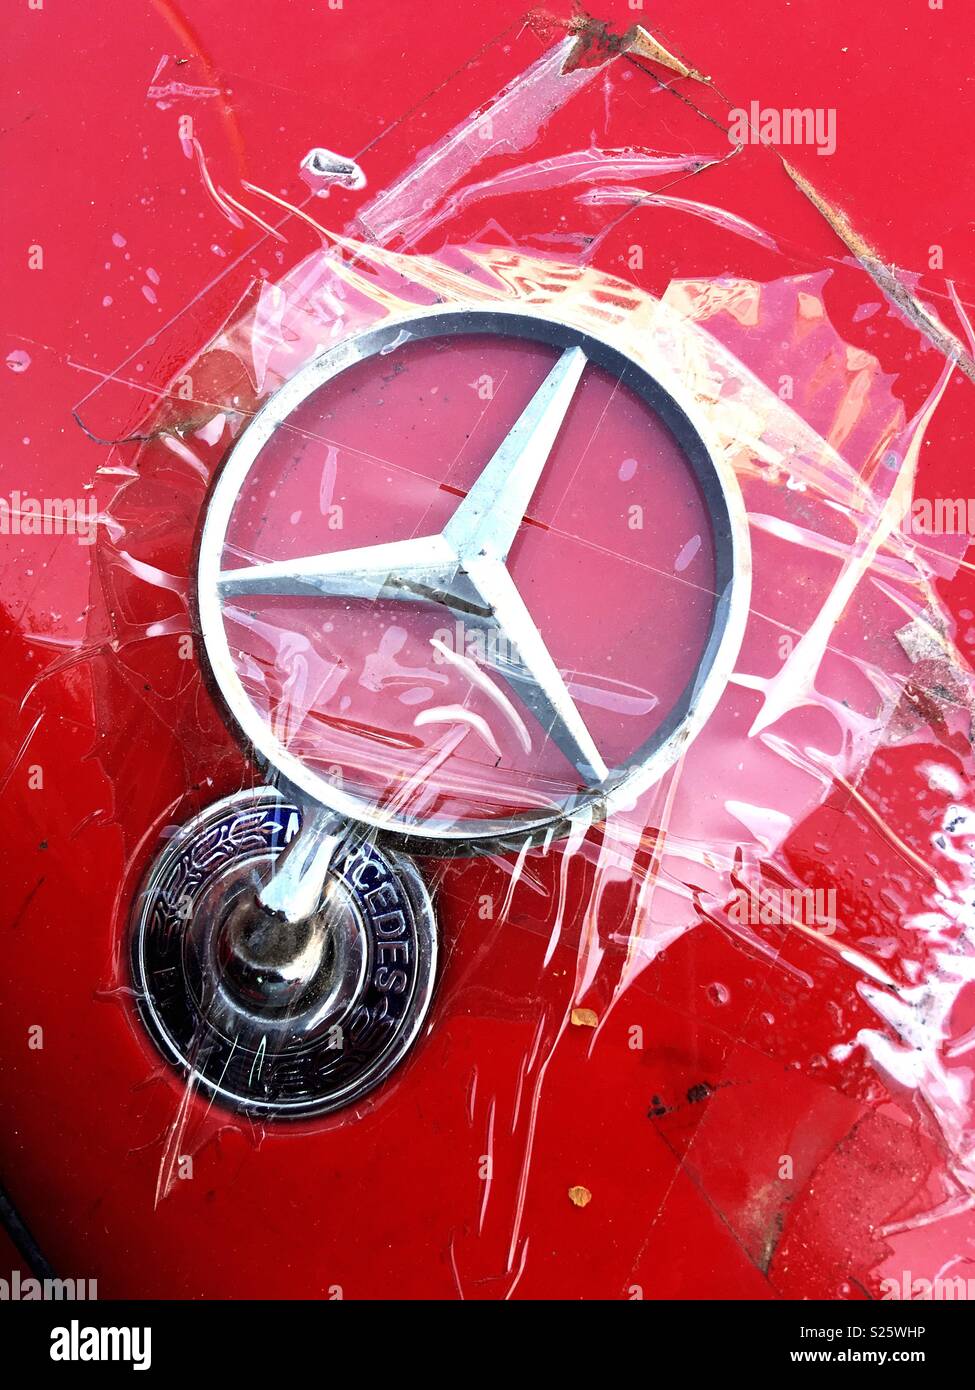 A Broken Mercedes Benz Star Logo On The Hood Of A Red Daimler Fixed With Transparent Tape Stock Photo Alamy